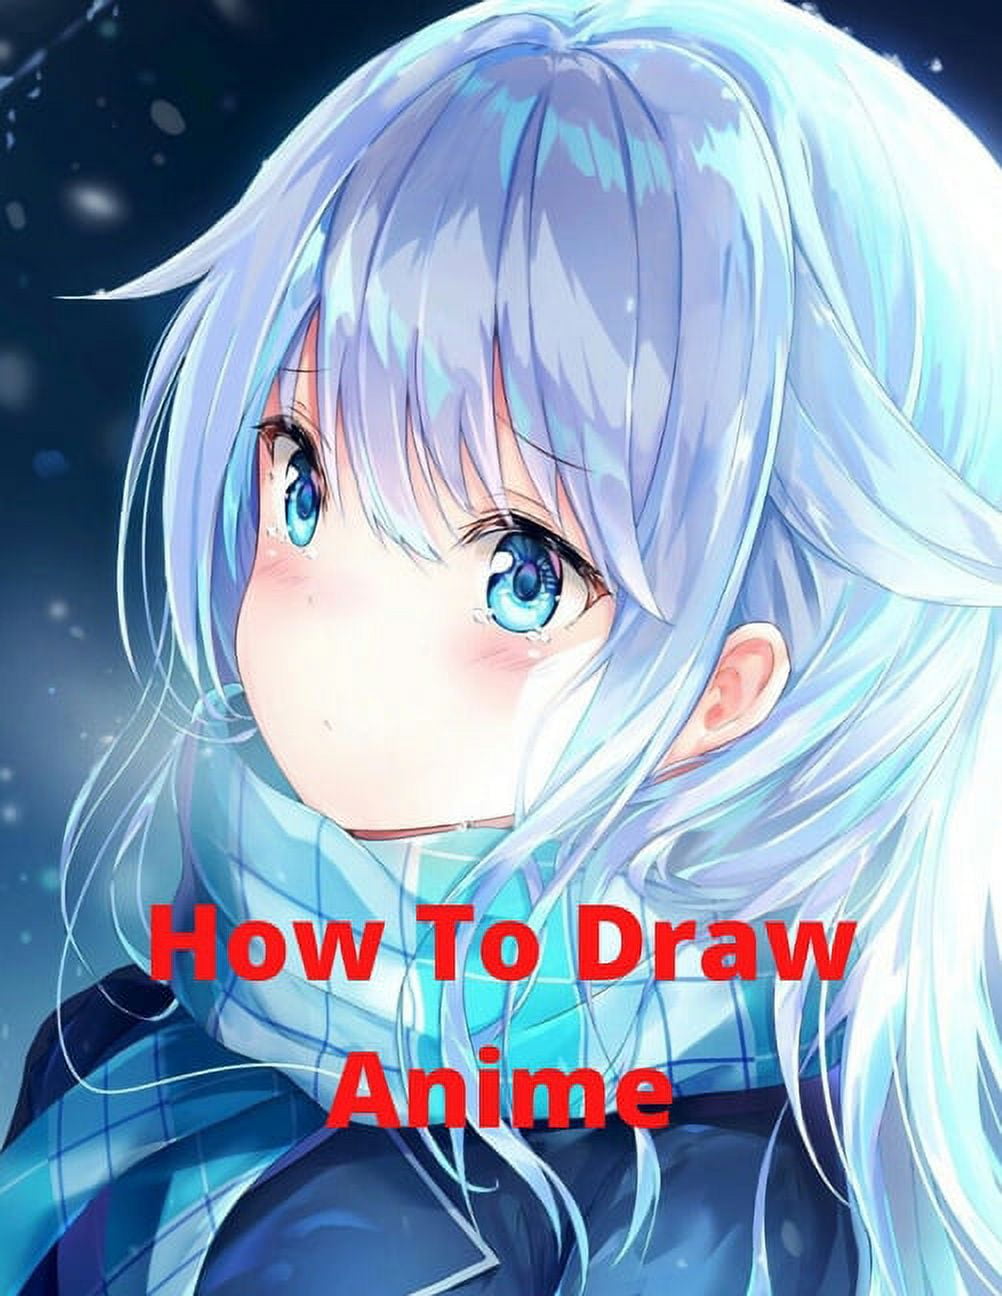 How To Draw Anime for the Beginner : A Step-by-Step Guide to Drawing Action  Anime Everything you Need to Start Drawing Right Away (Paperback)